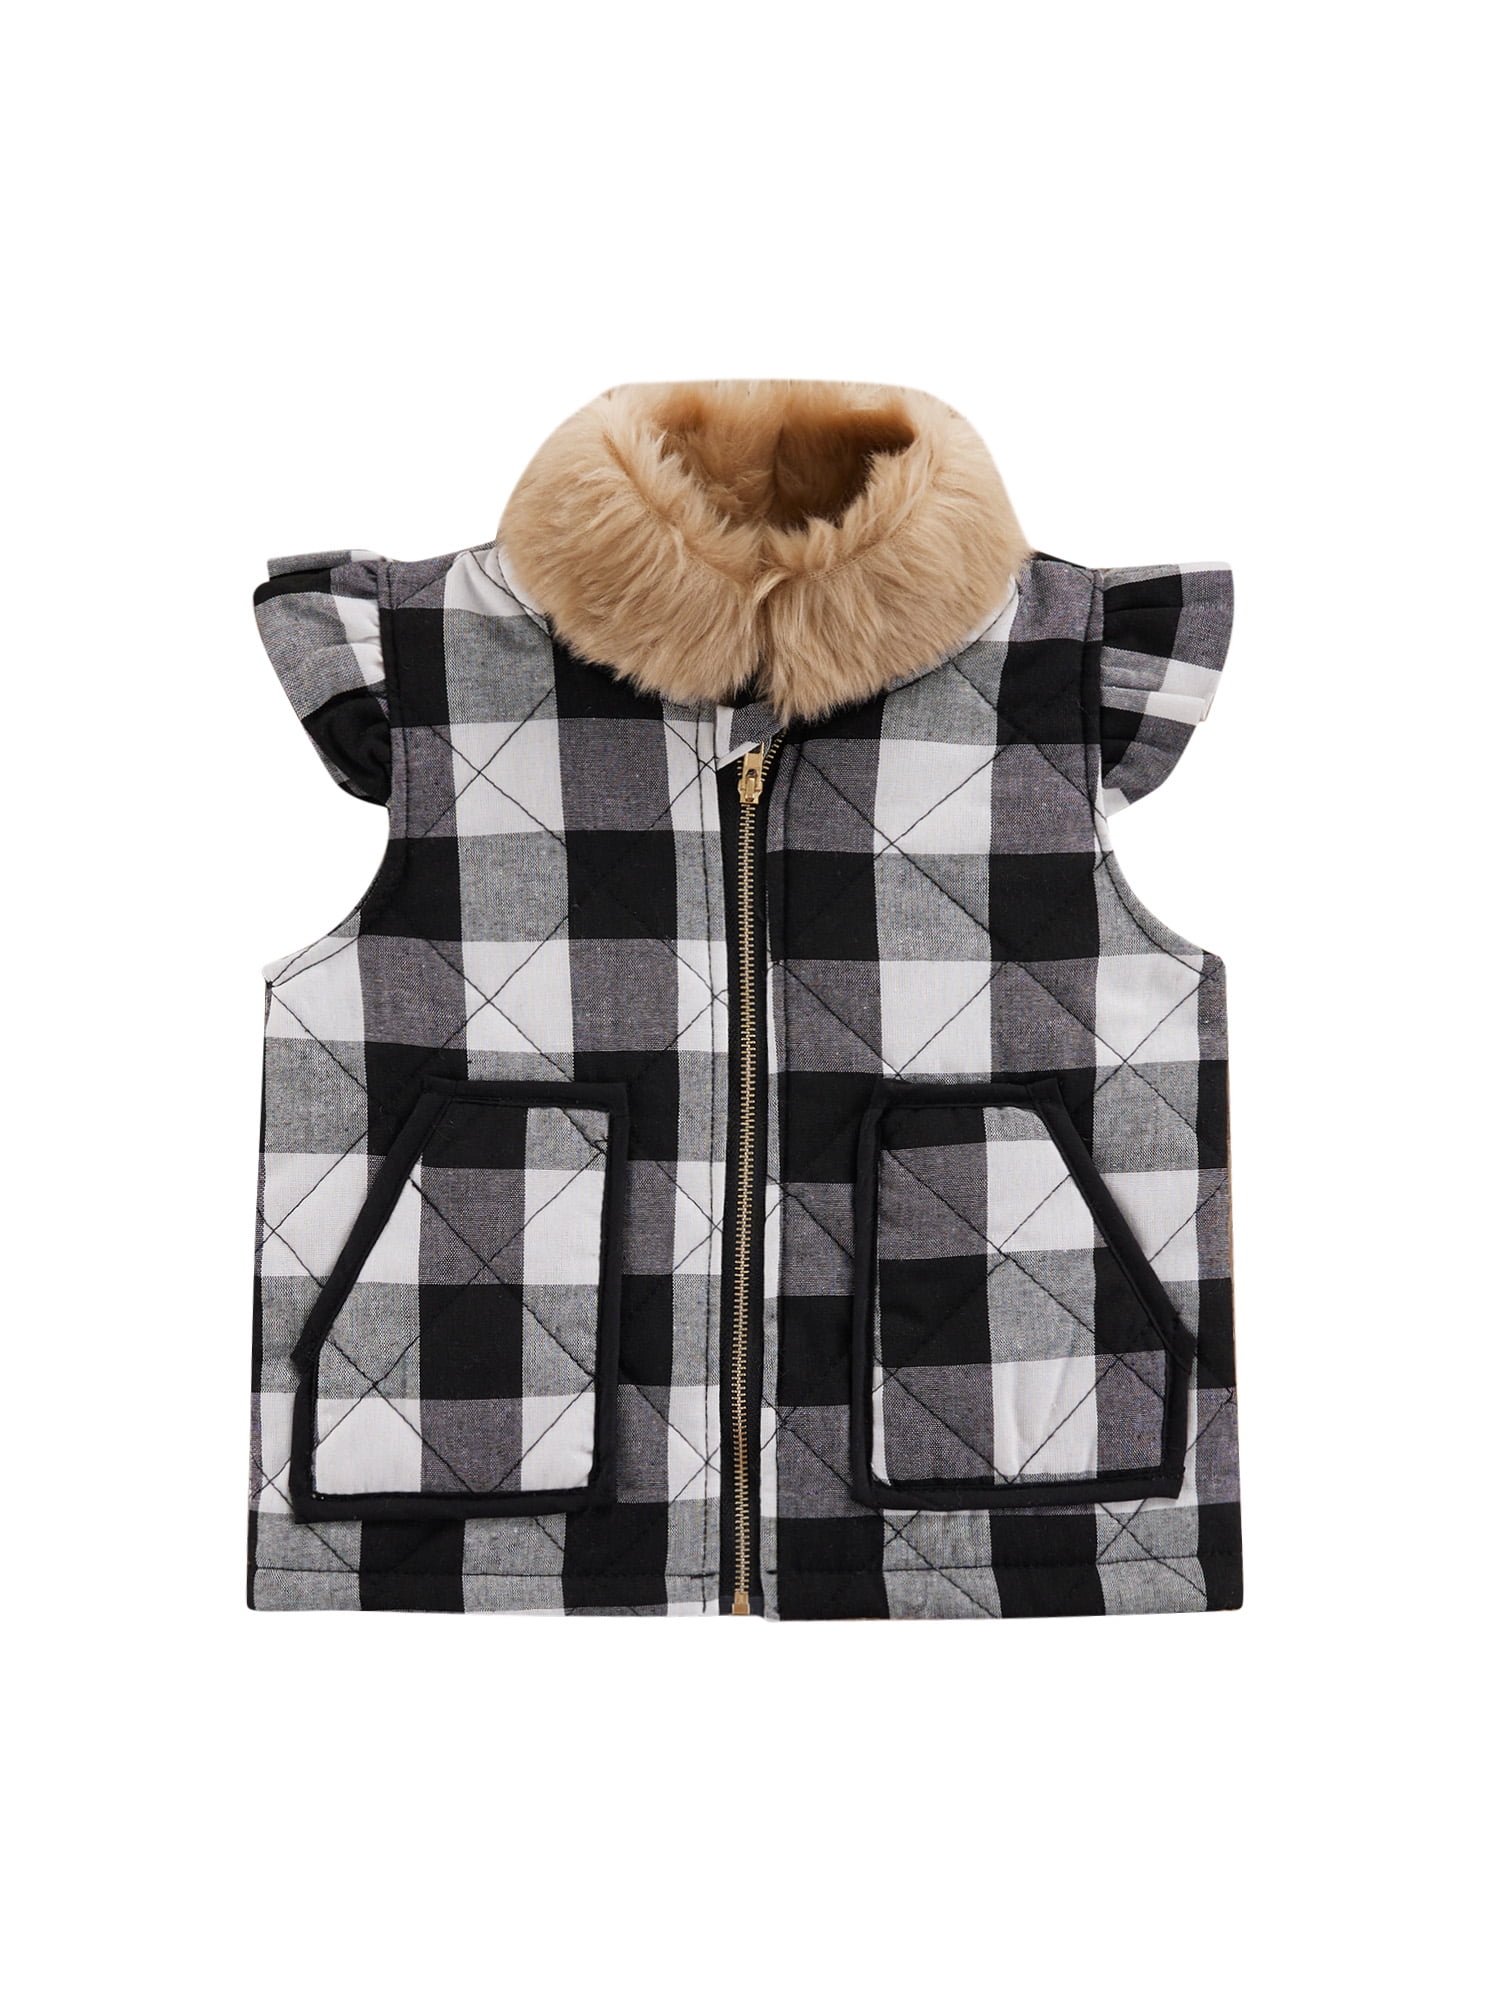 Girls Buffalo Cotton Plaid Quilted Vest Cute Puff Lined Gilet 